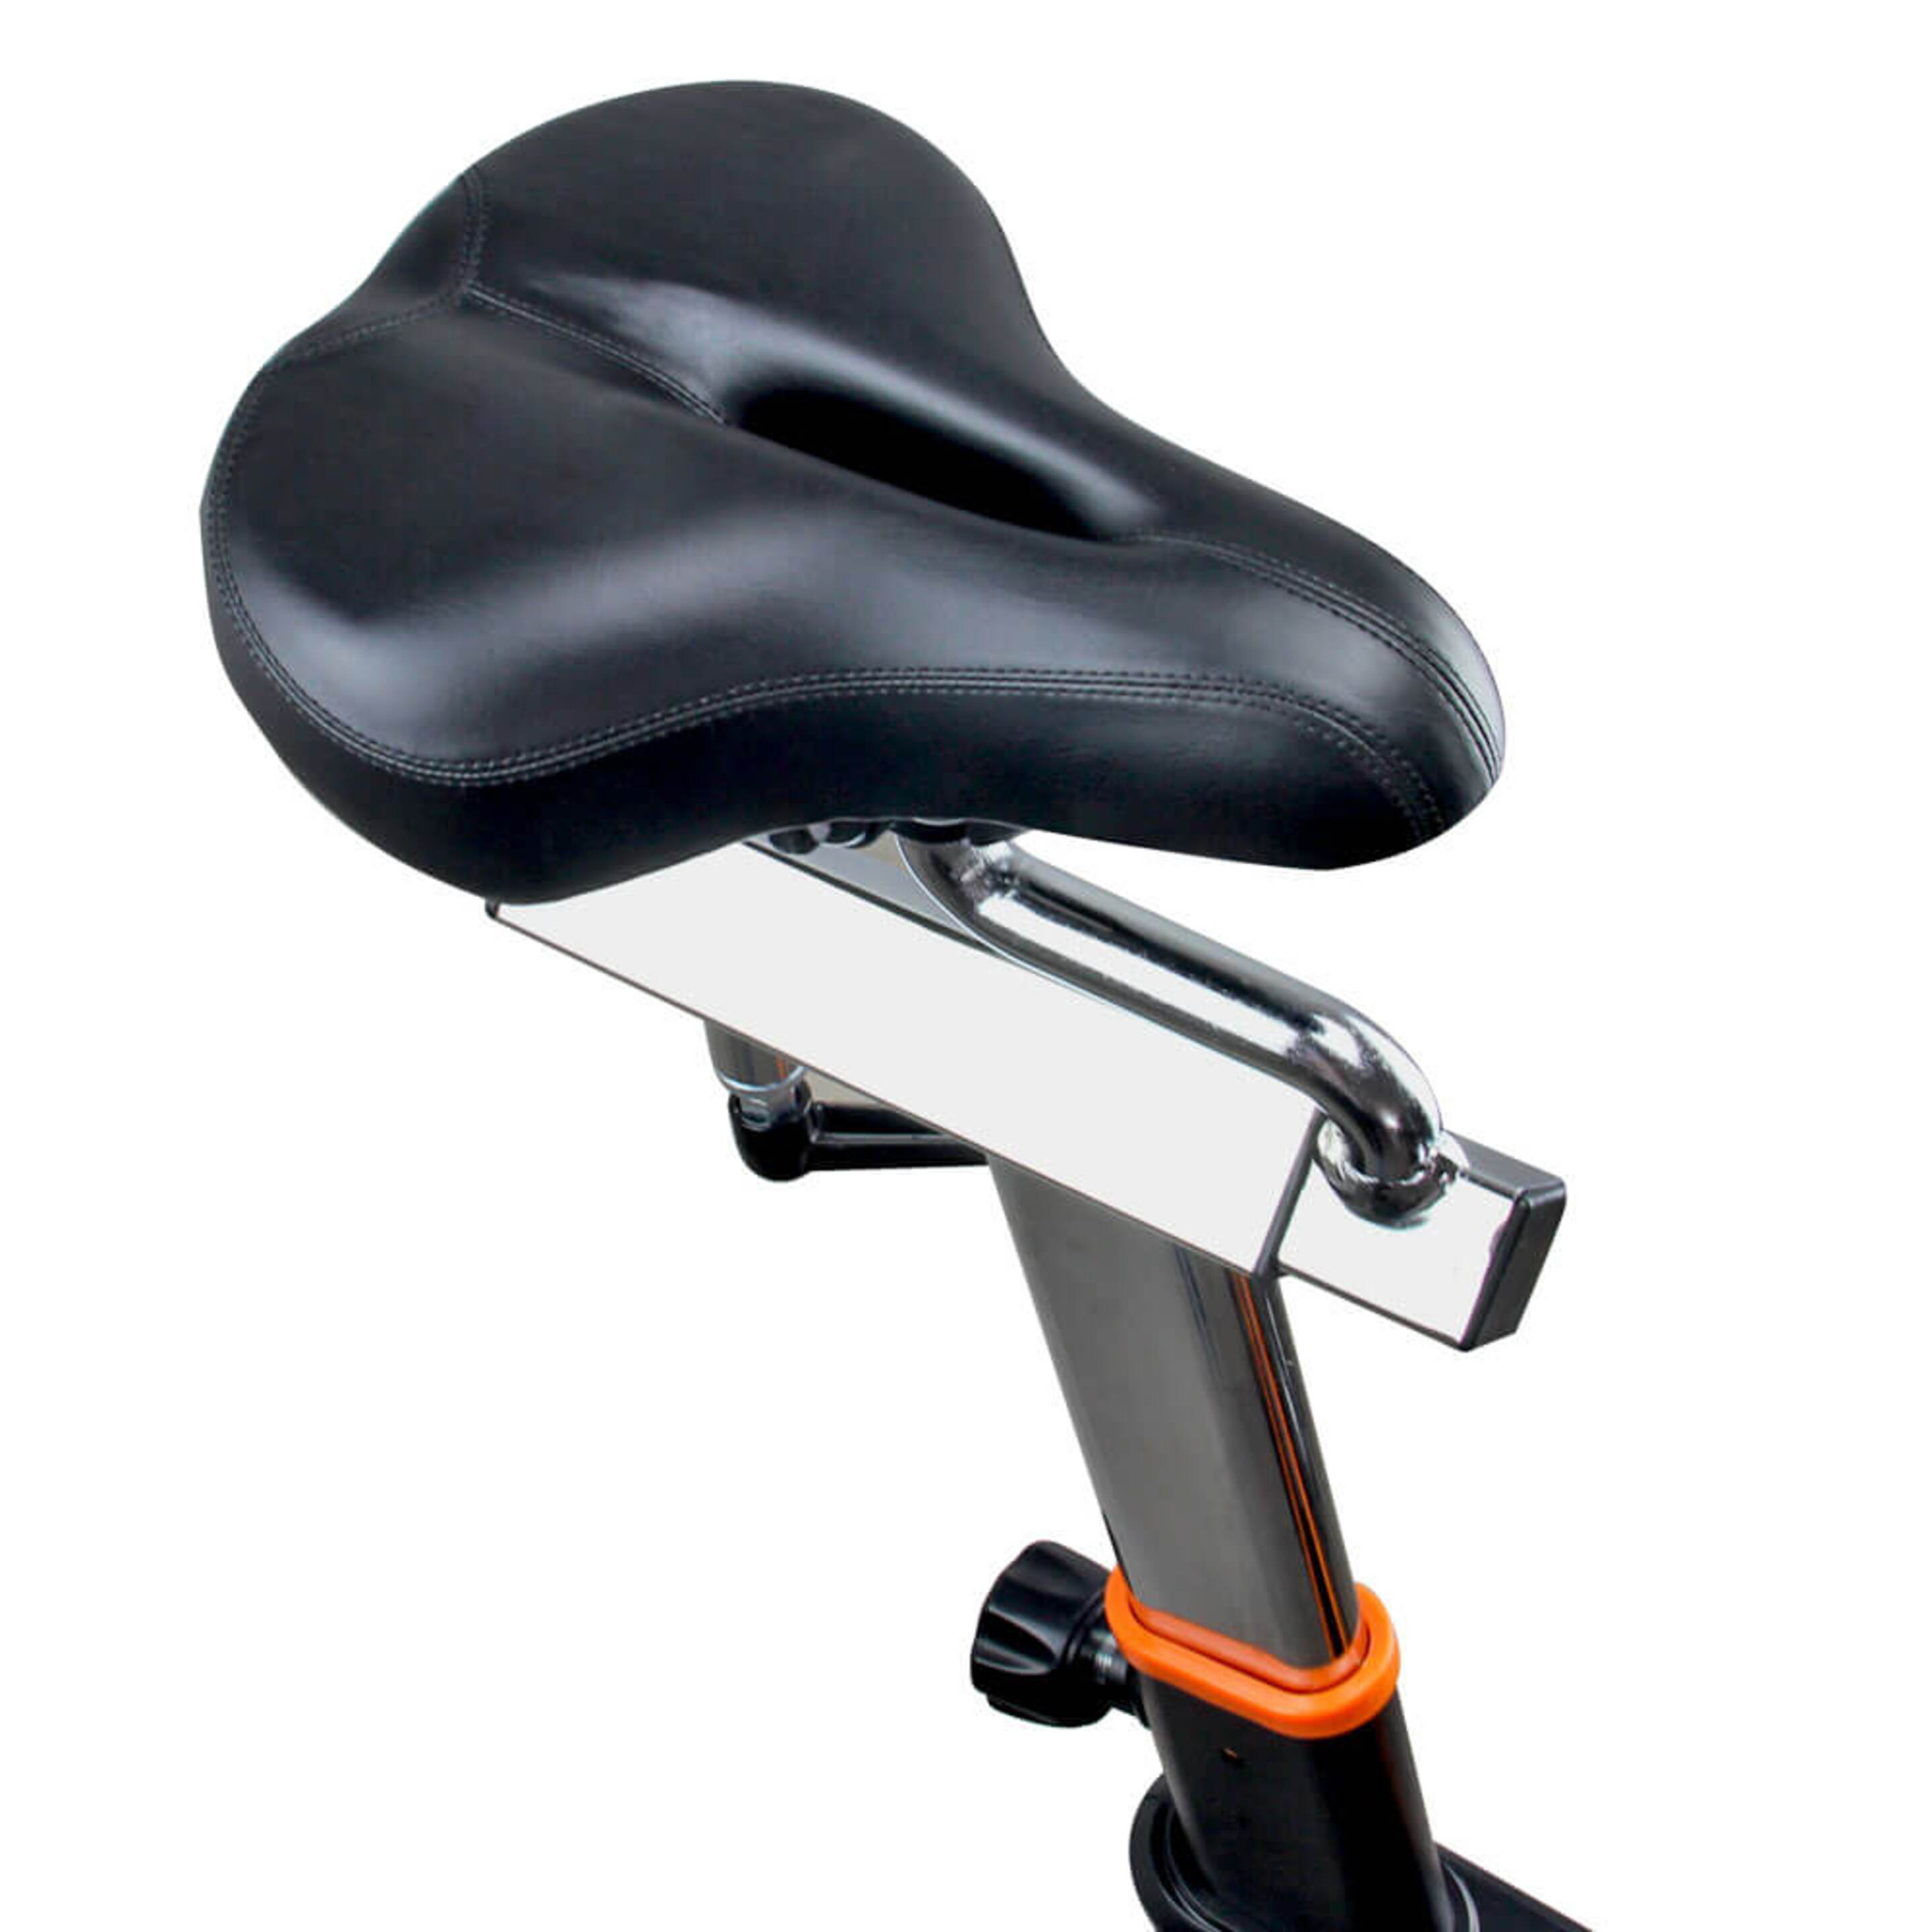 Bicicleta Spinning Fire Trainer